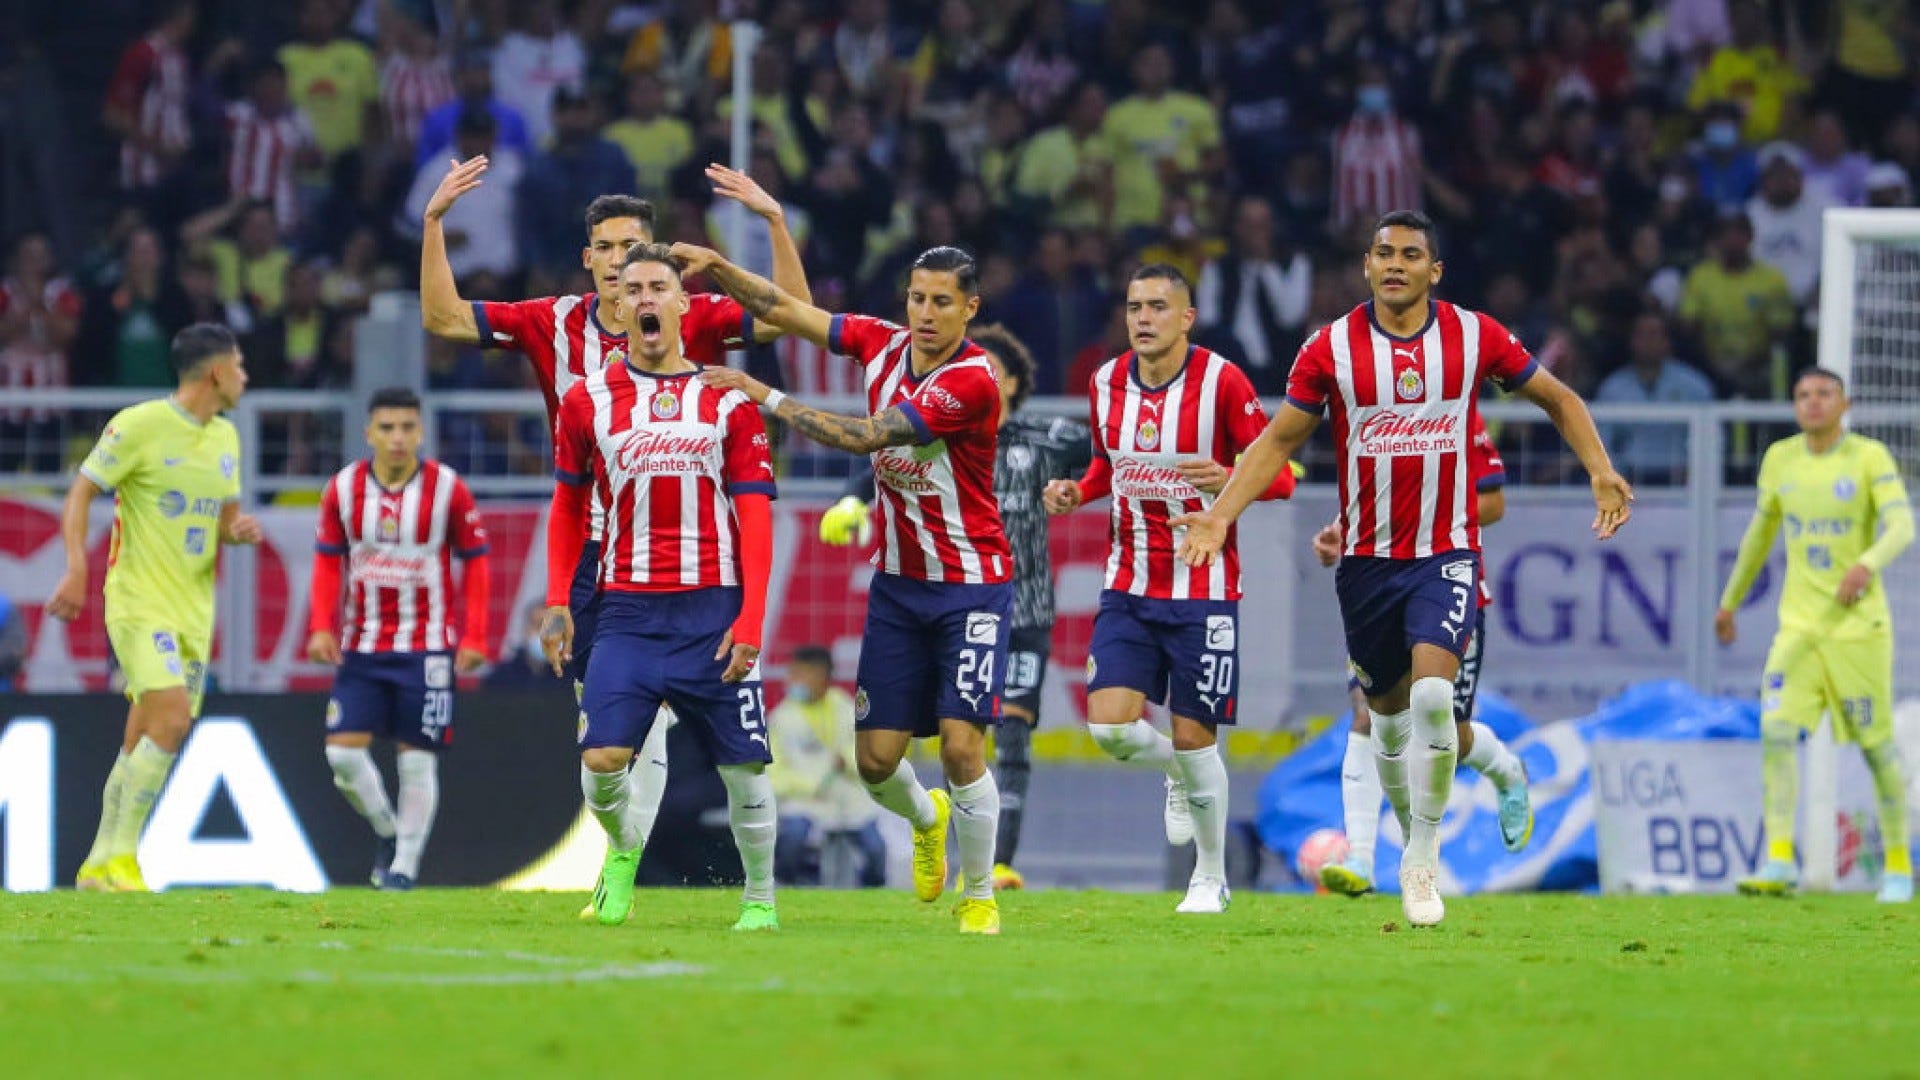 Sky Cup 2022 When will Chivas play? Calendar, dates and competitions